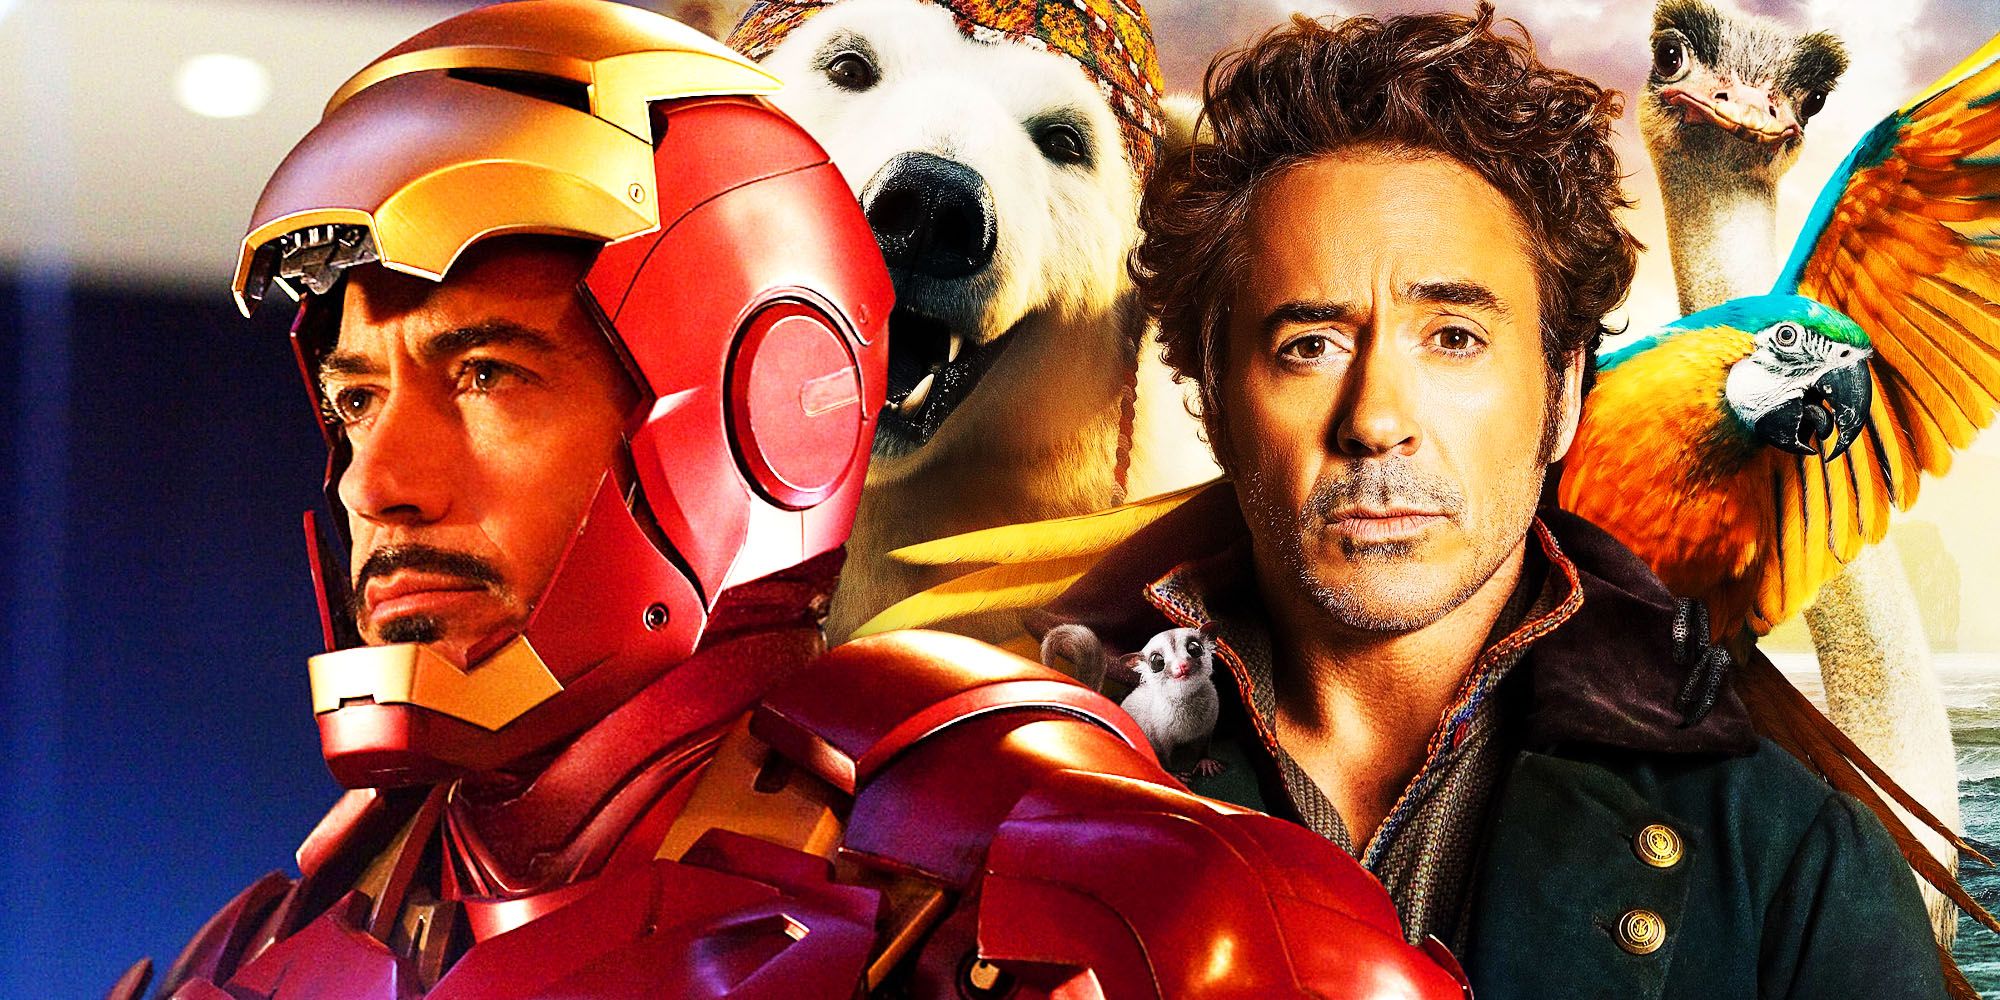 Robert Downey Jr. as Iron Man and Dolittle